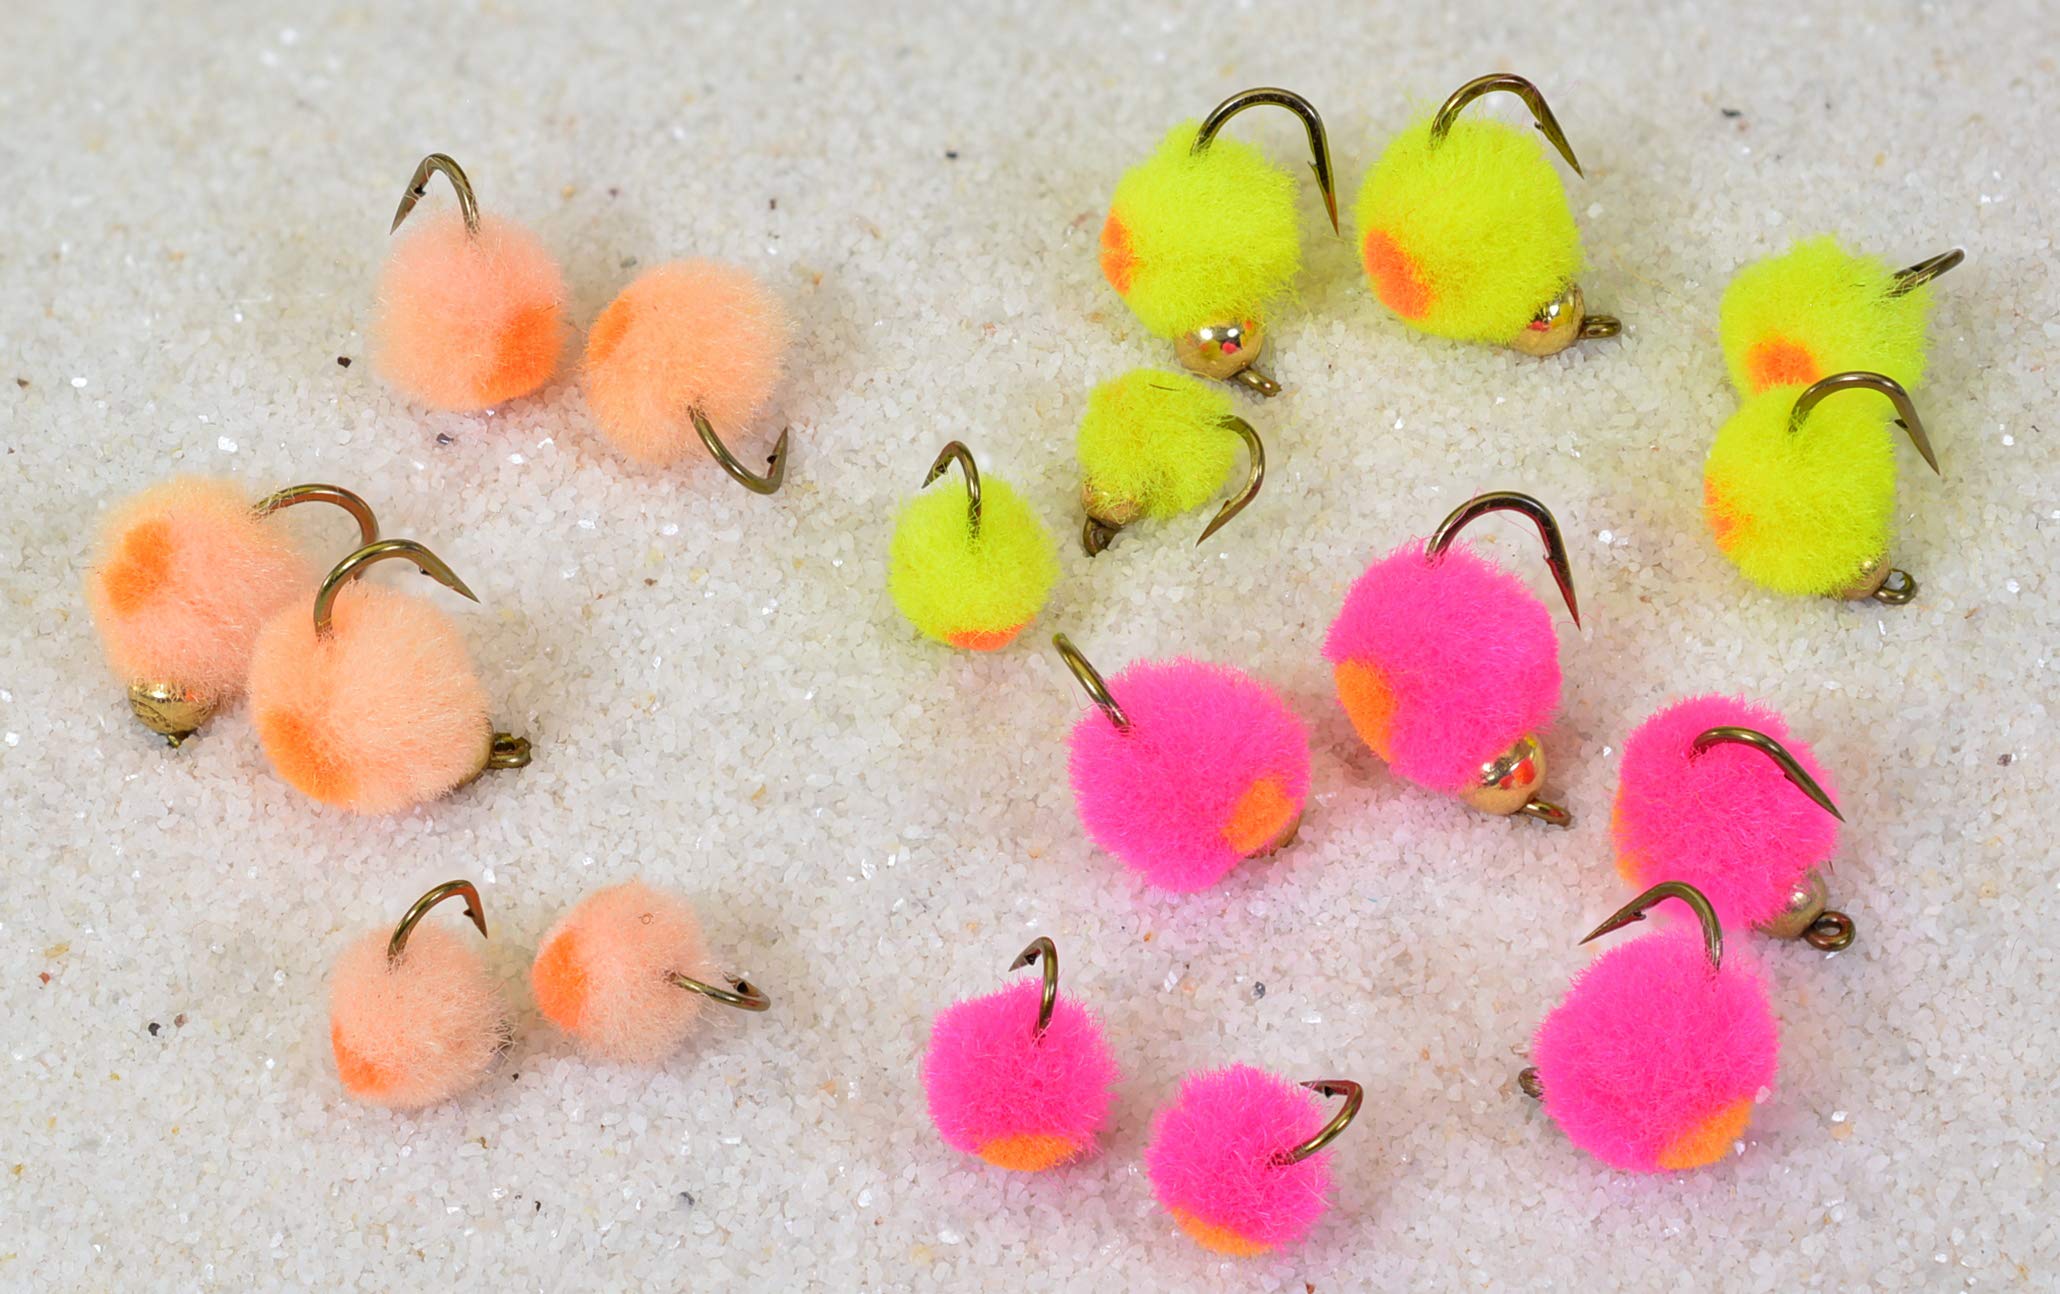 Tungsten Bead Egg Fly in Pink, Peach, Chartreuse or Assorted